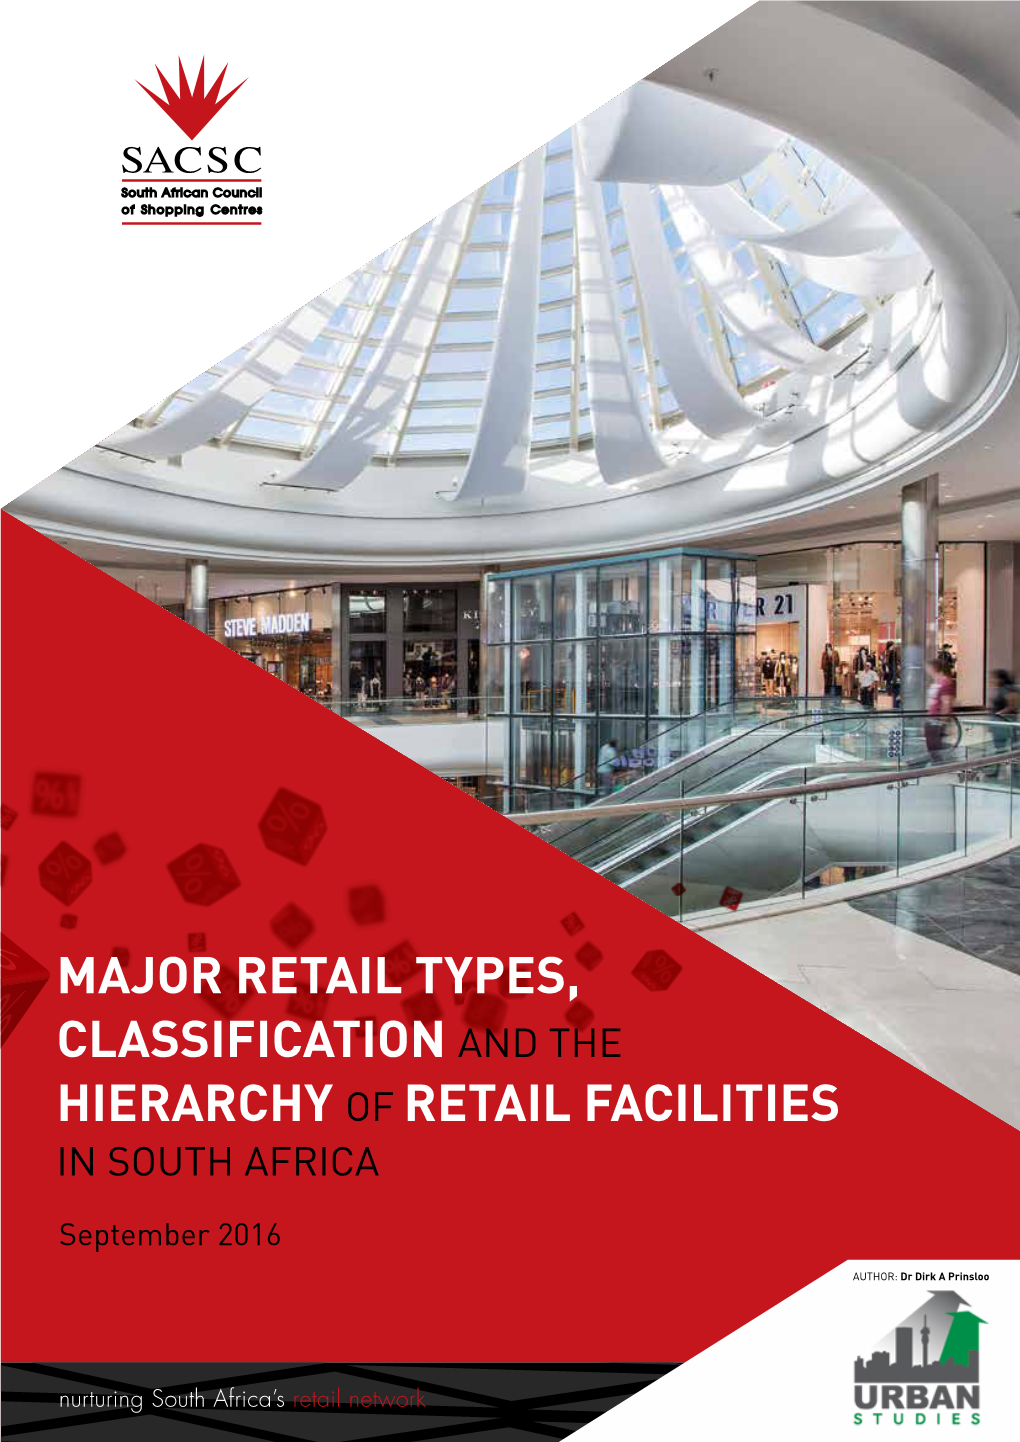 Major Retail Types, Classification and the Hierarchy of Retail Facilities in South Africa